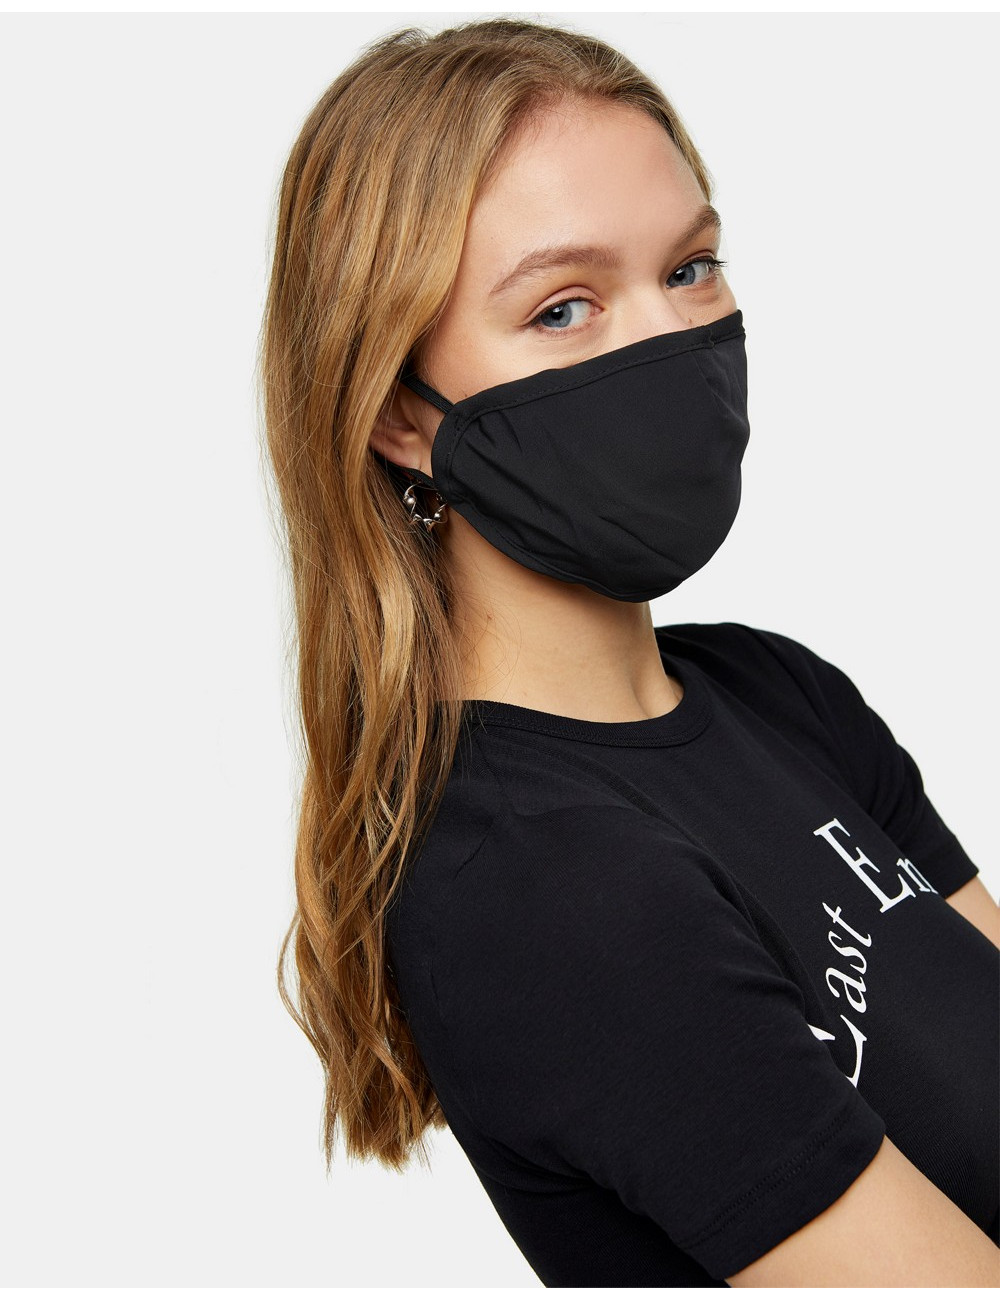 Topshop face covering in black